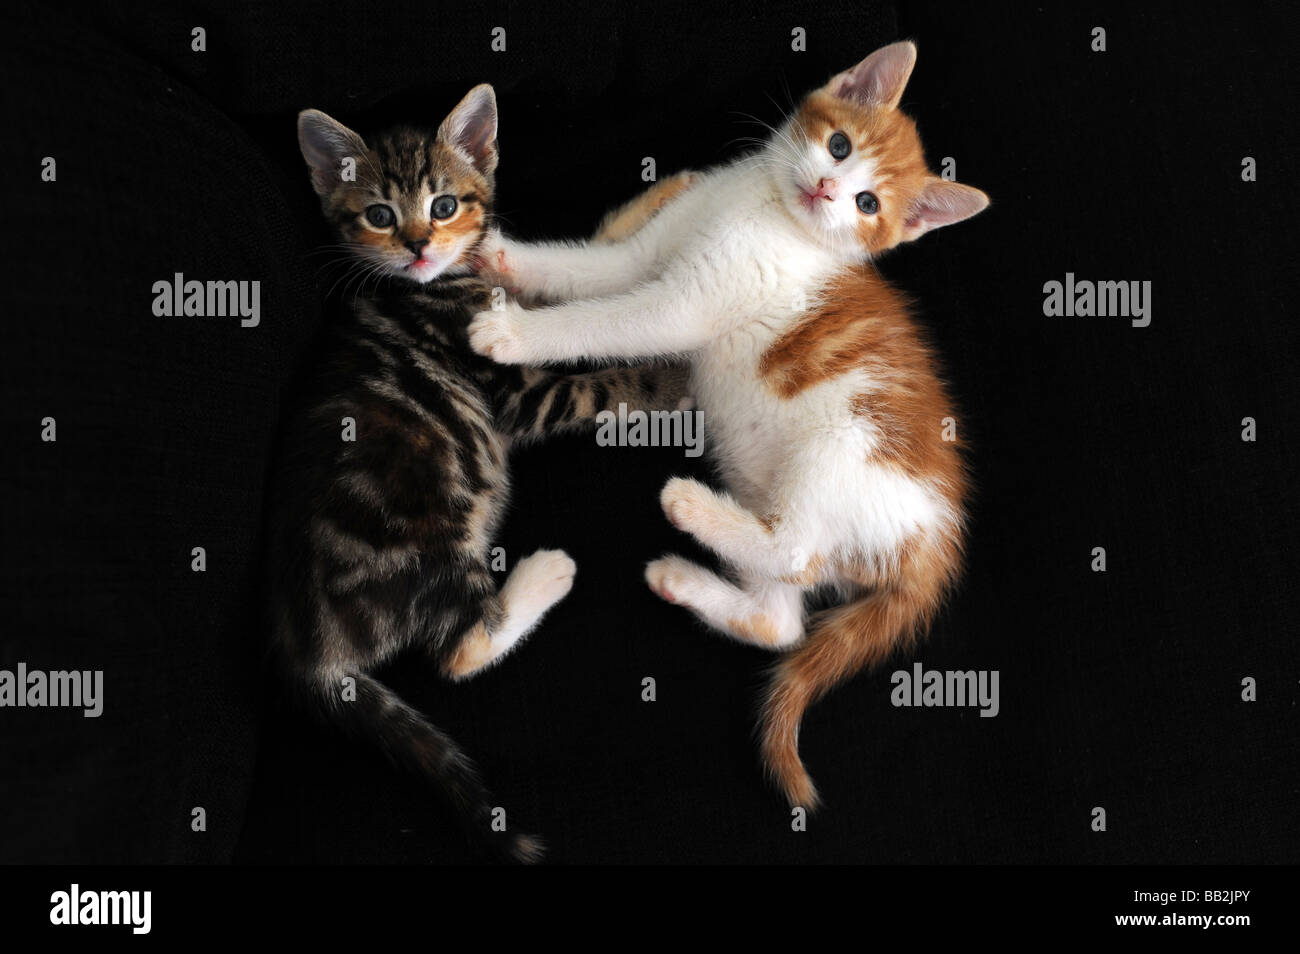 A small ginger and white kitten and a tabby kitten looking up into the camera against a black background Stock Photo